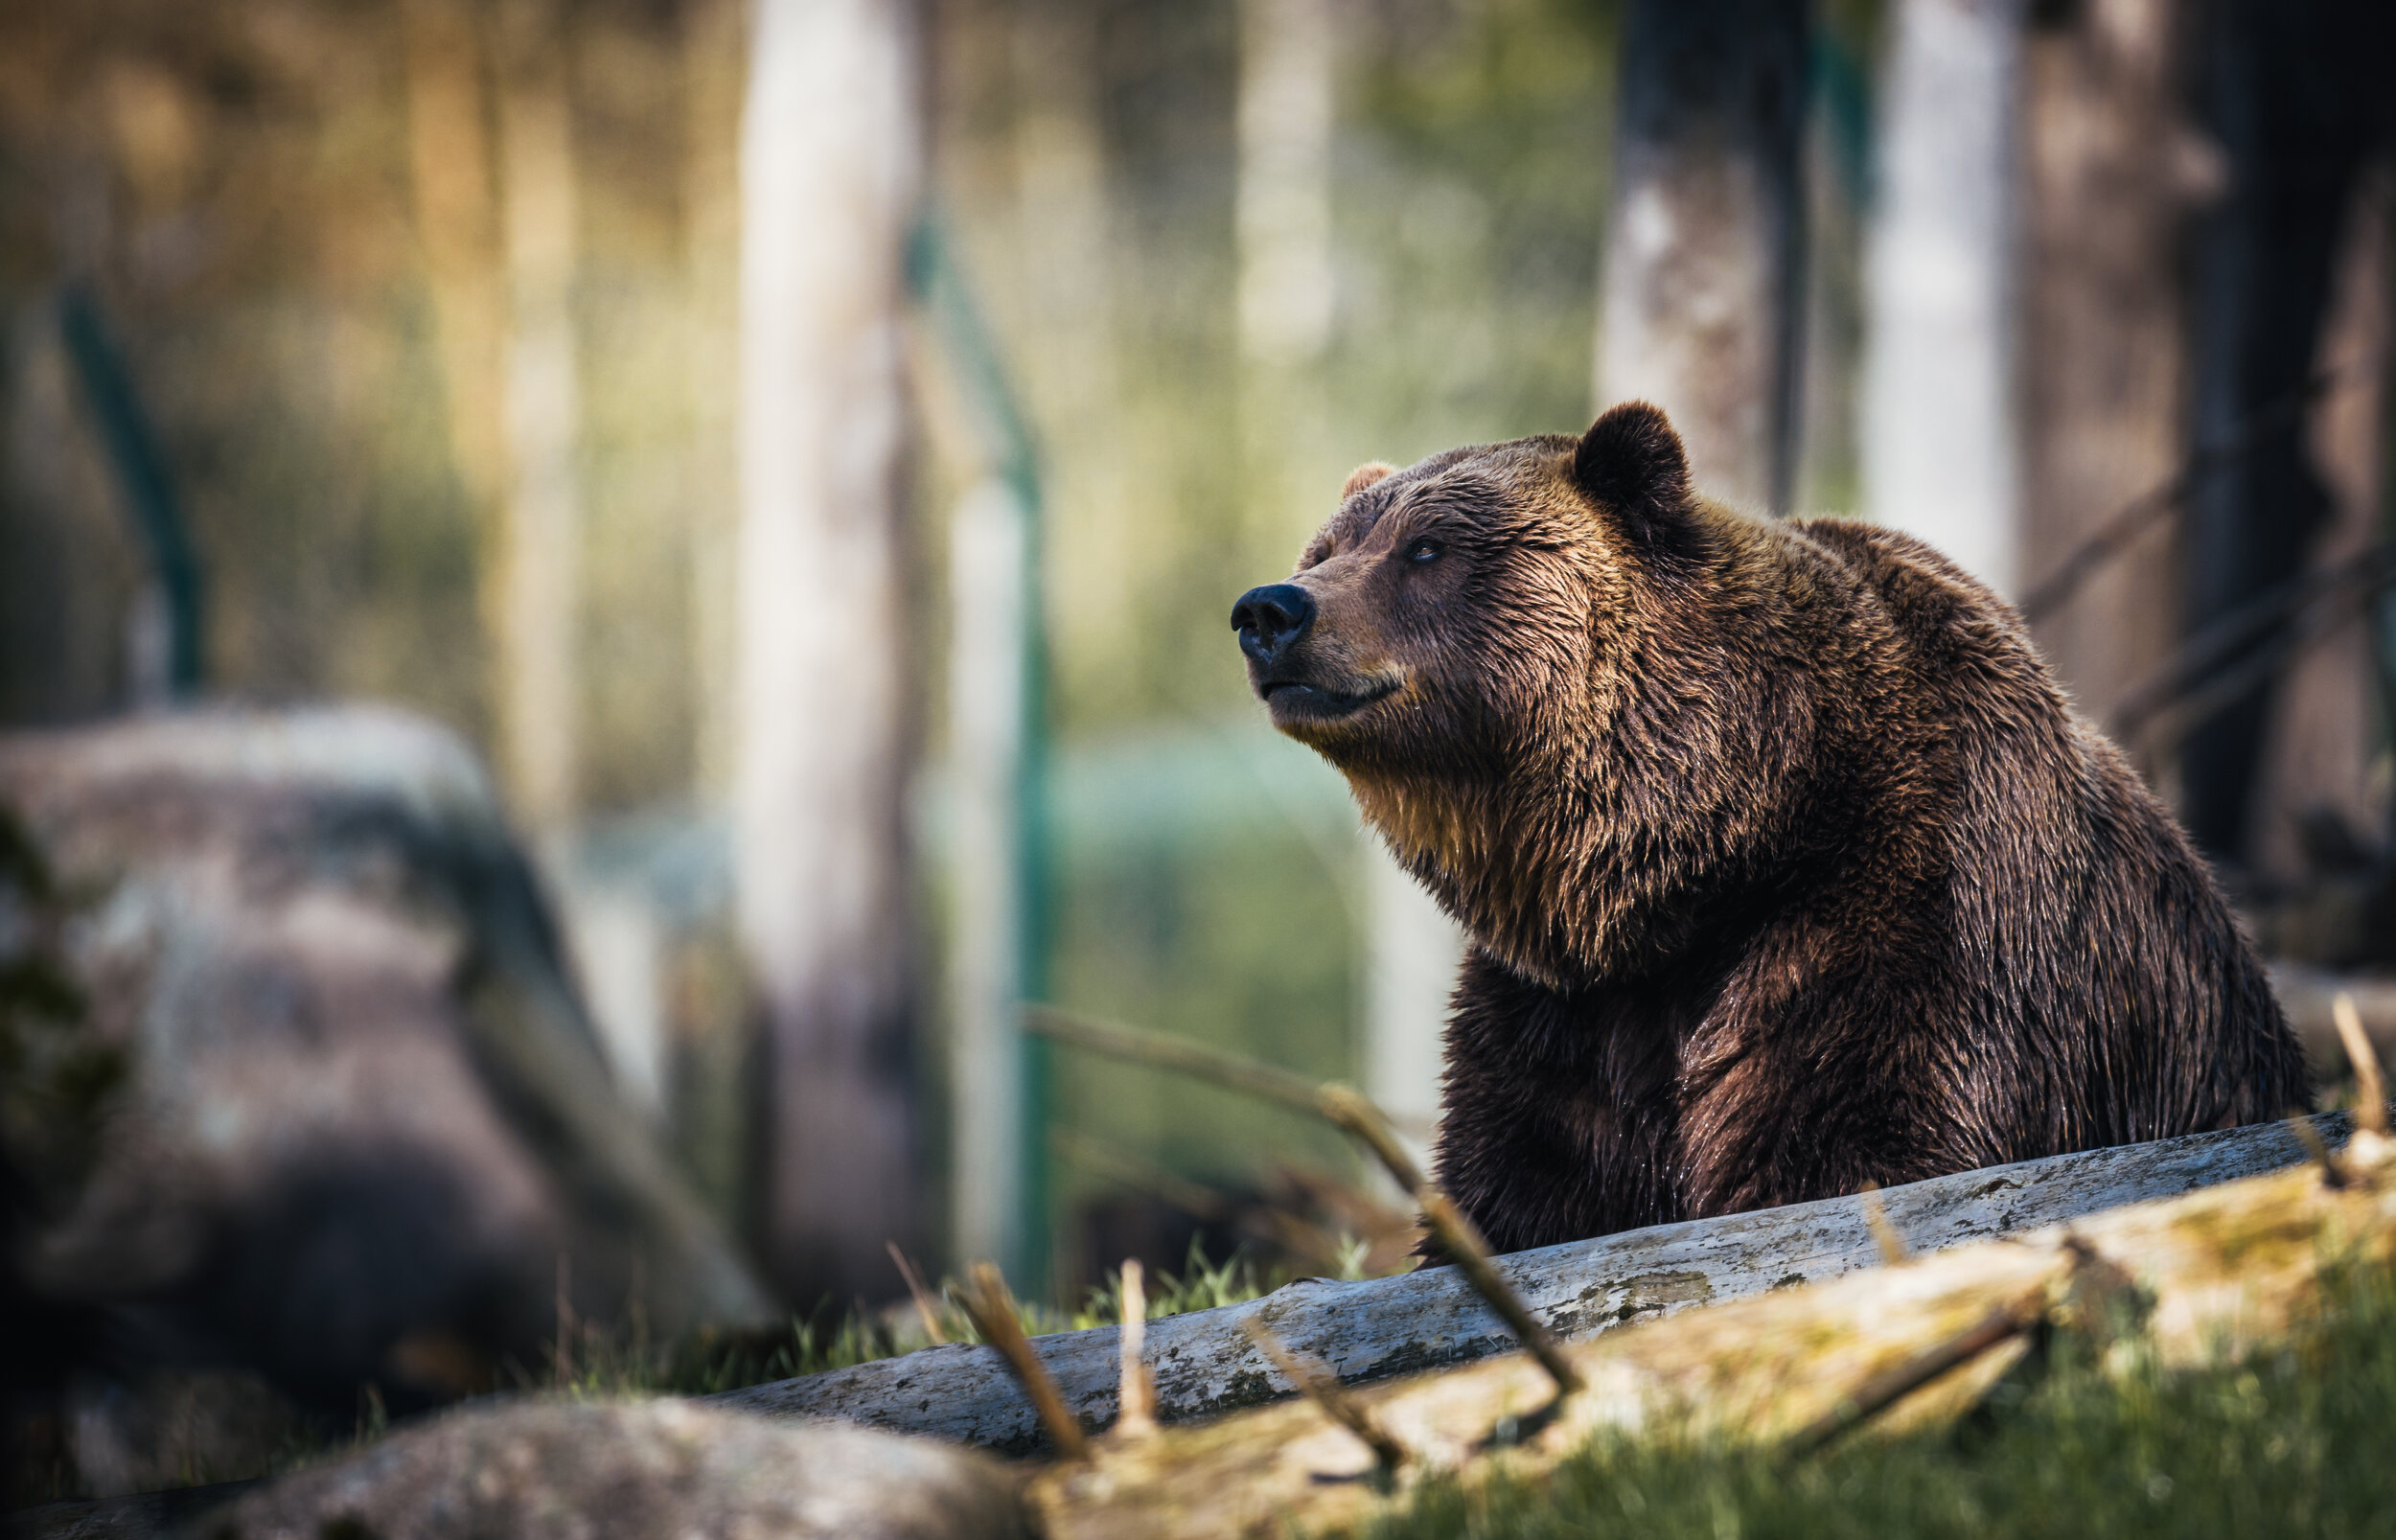 Canva - Close-Up Photography of Grizzly Bear.jpg